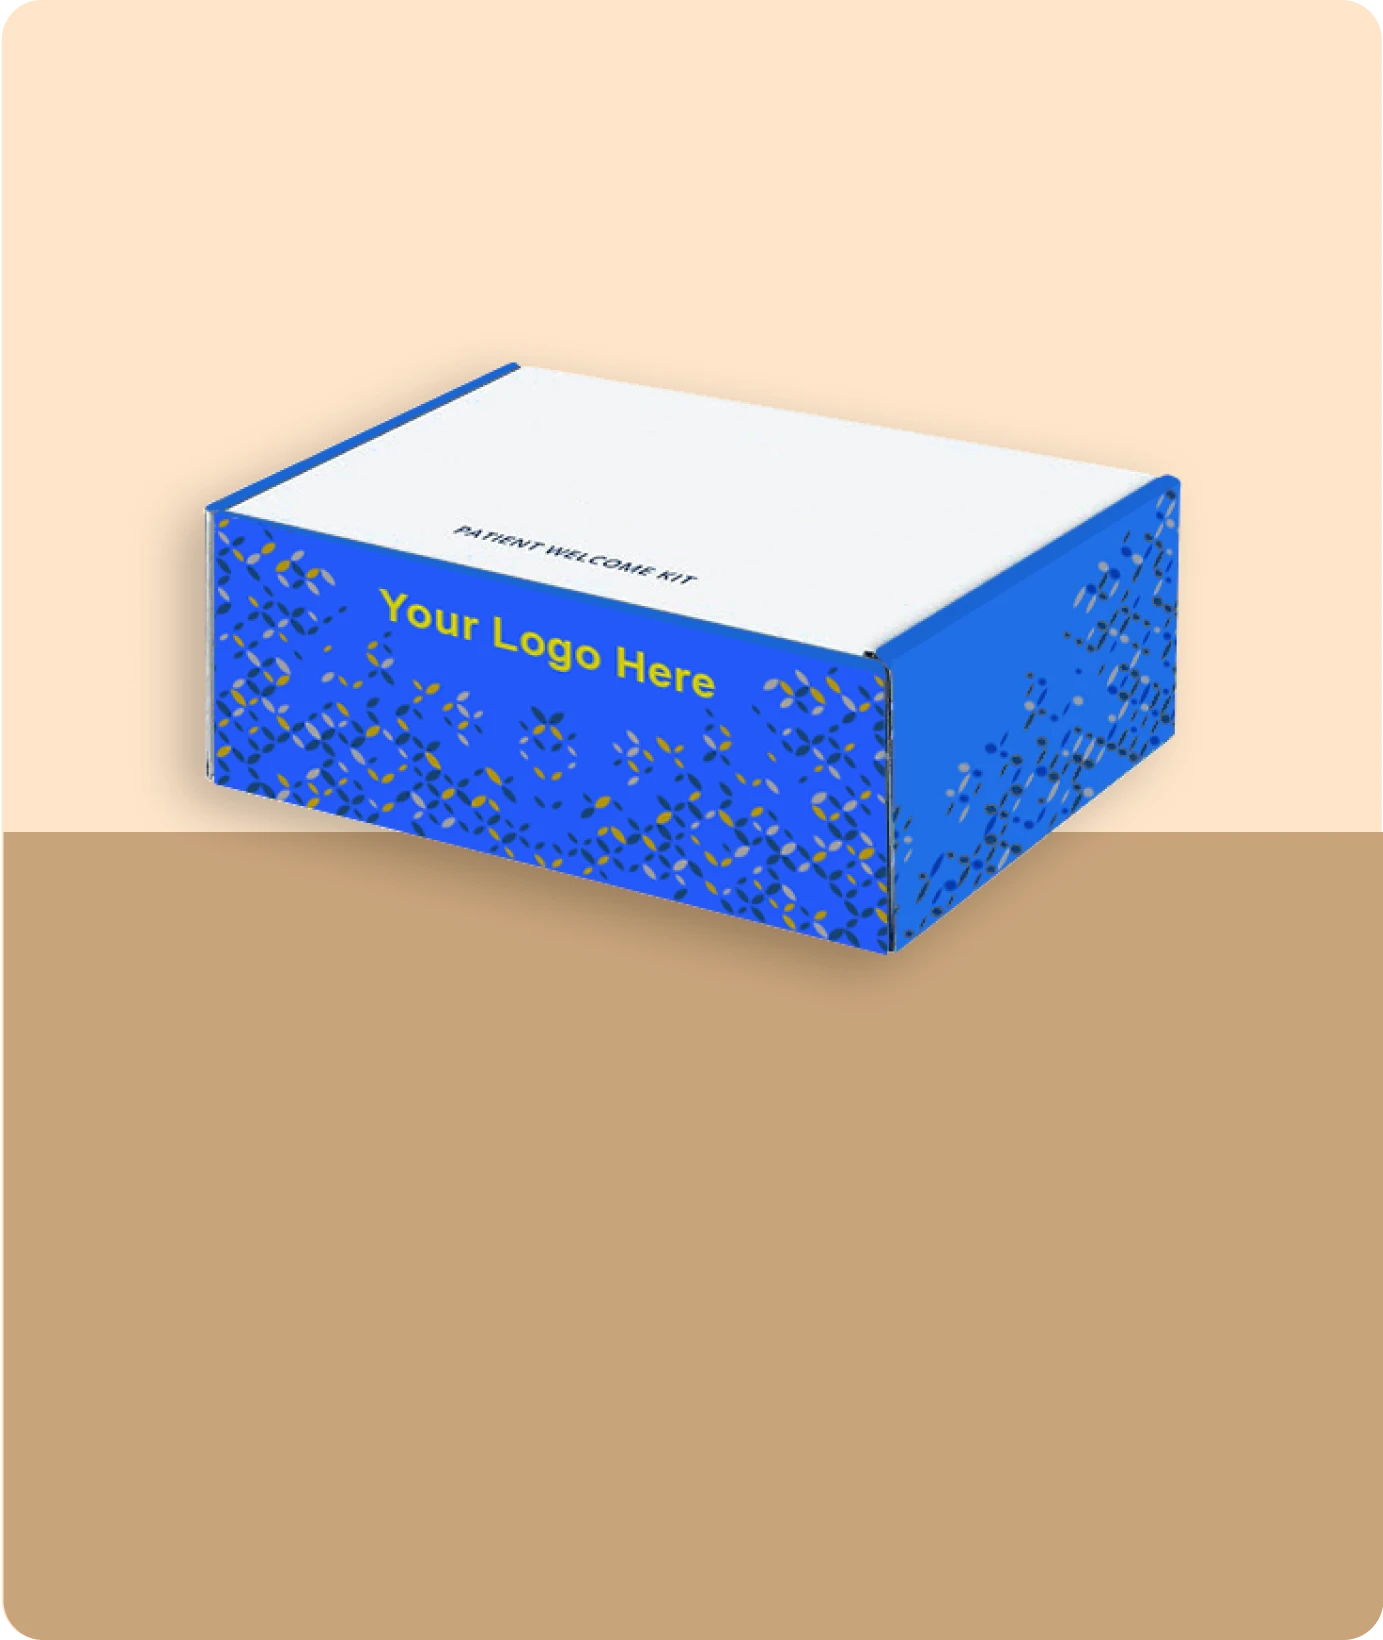 Roll End Tuck Top Boxes related products image | The Box Lane